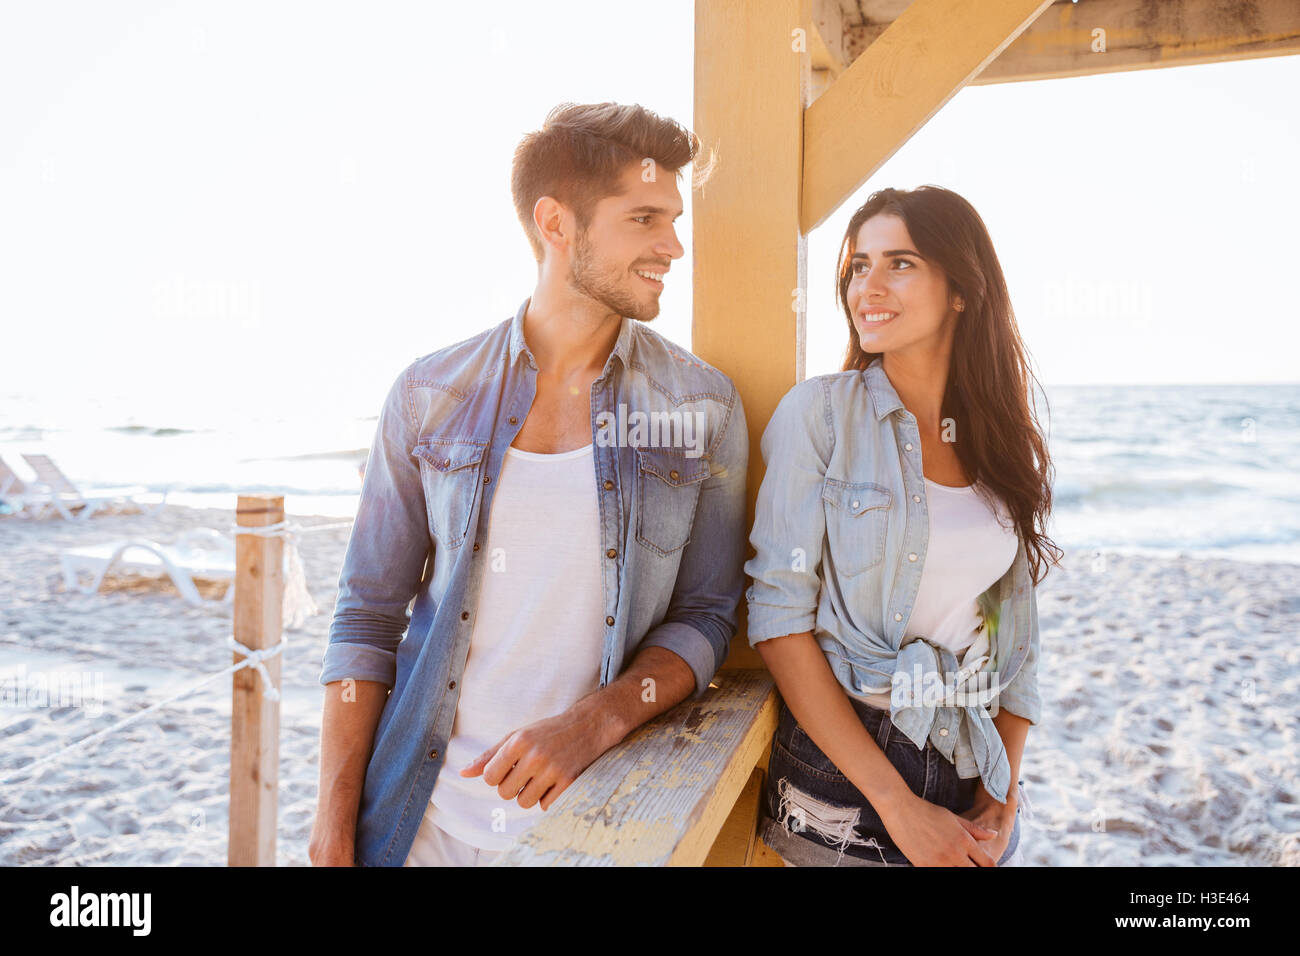 Young cheerful beautiful couple flirting at the beach Banque D'Images